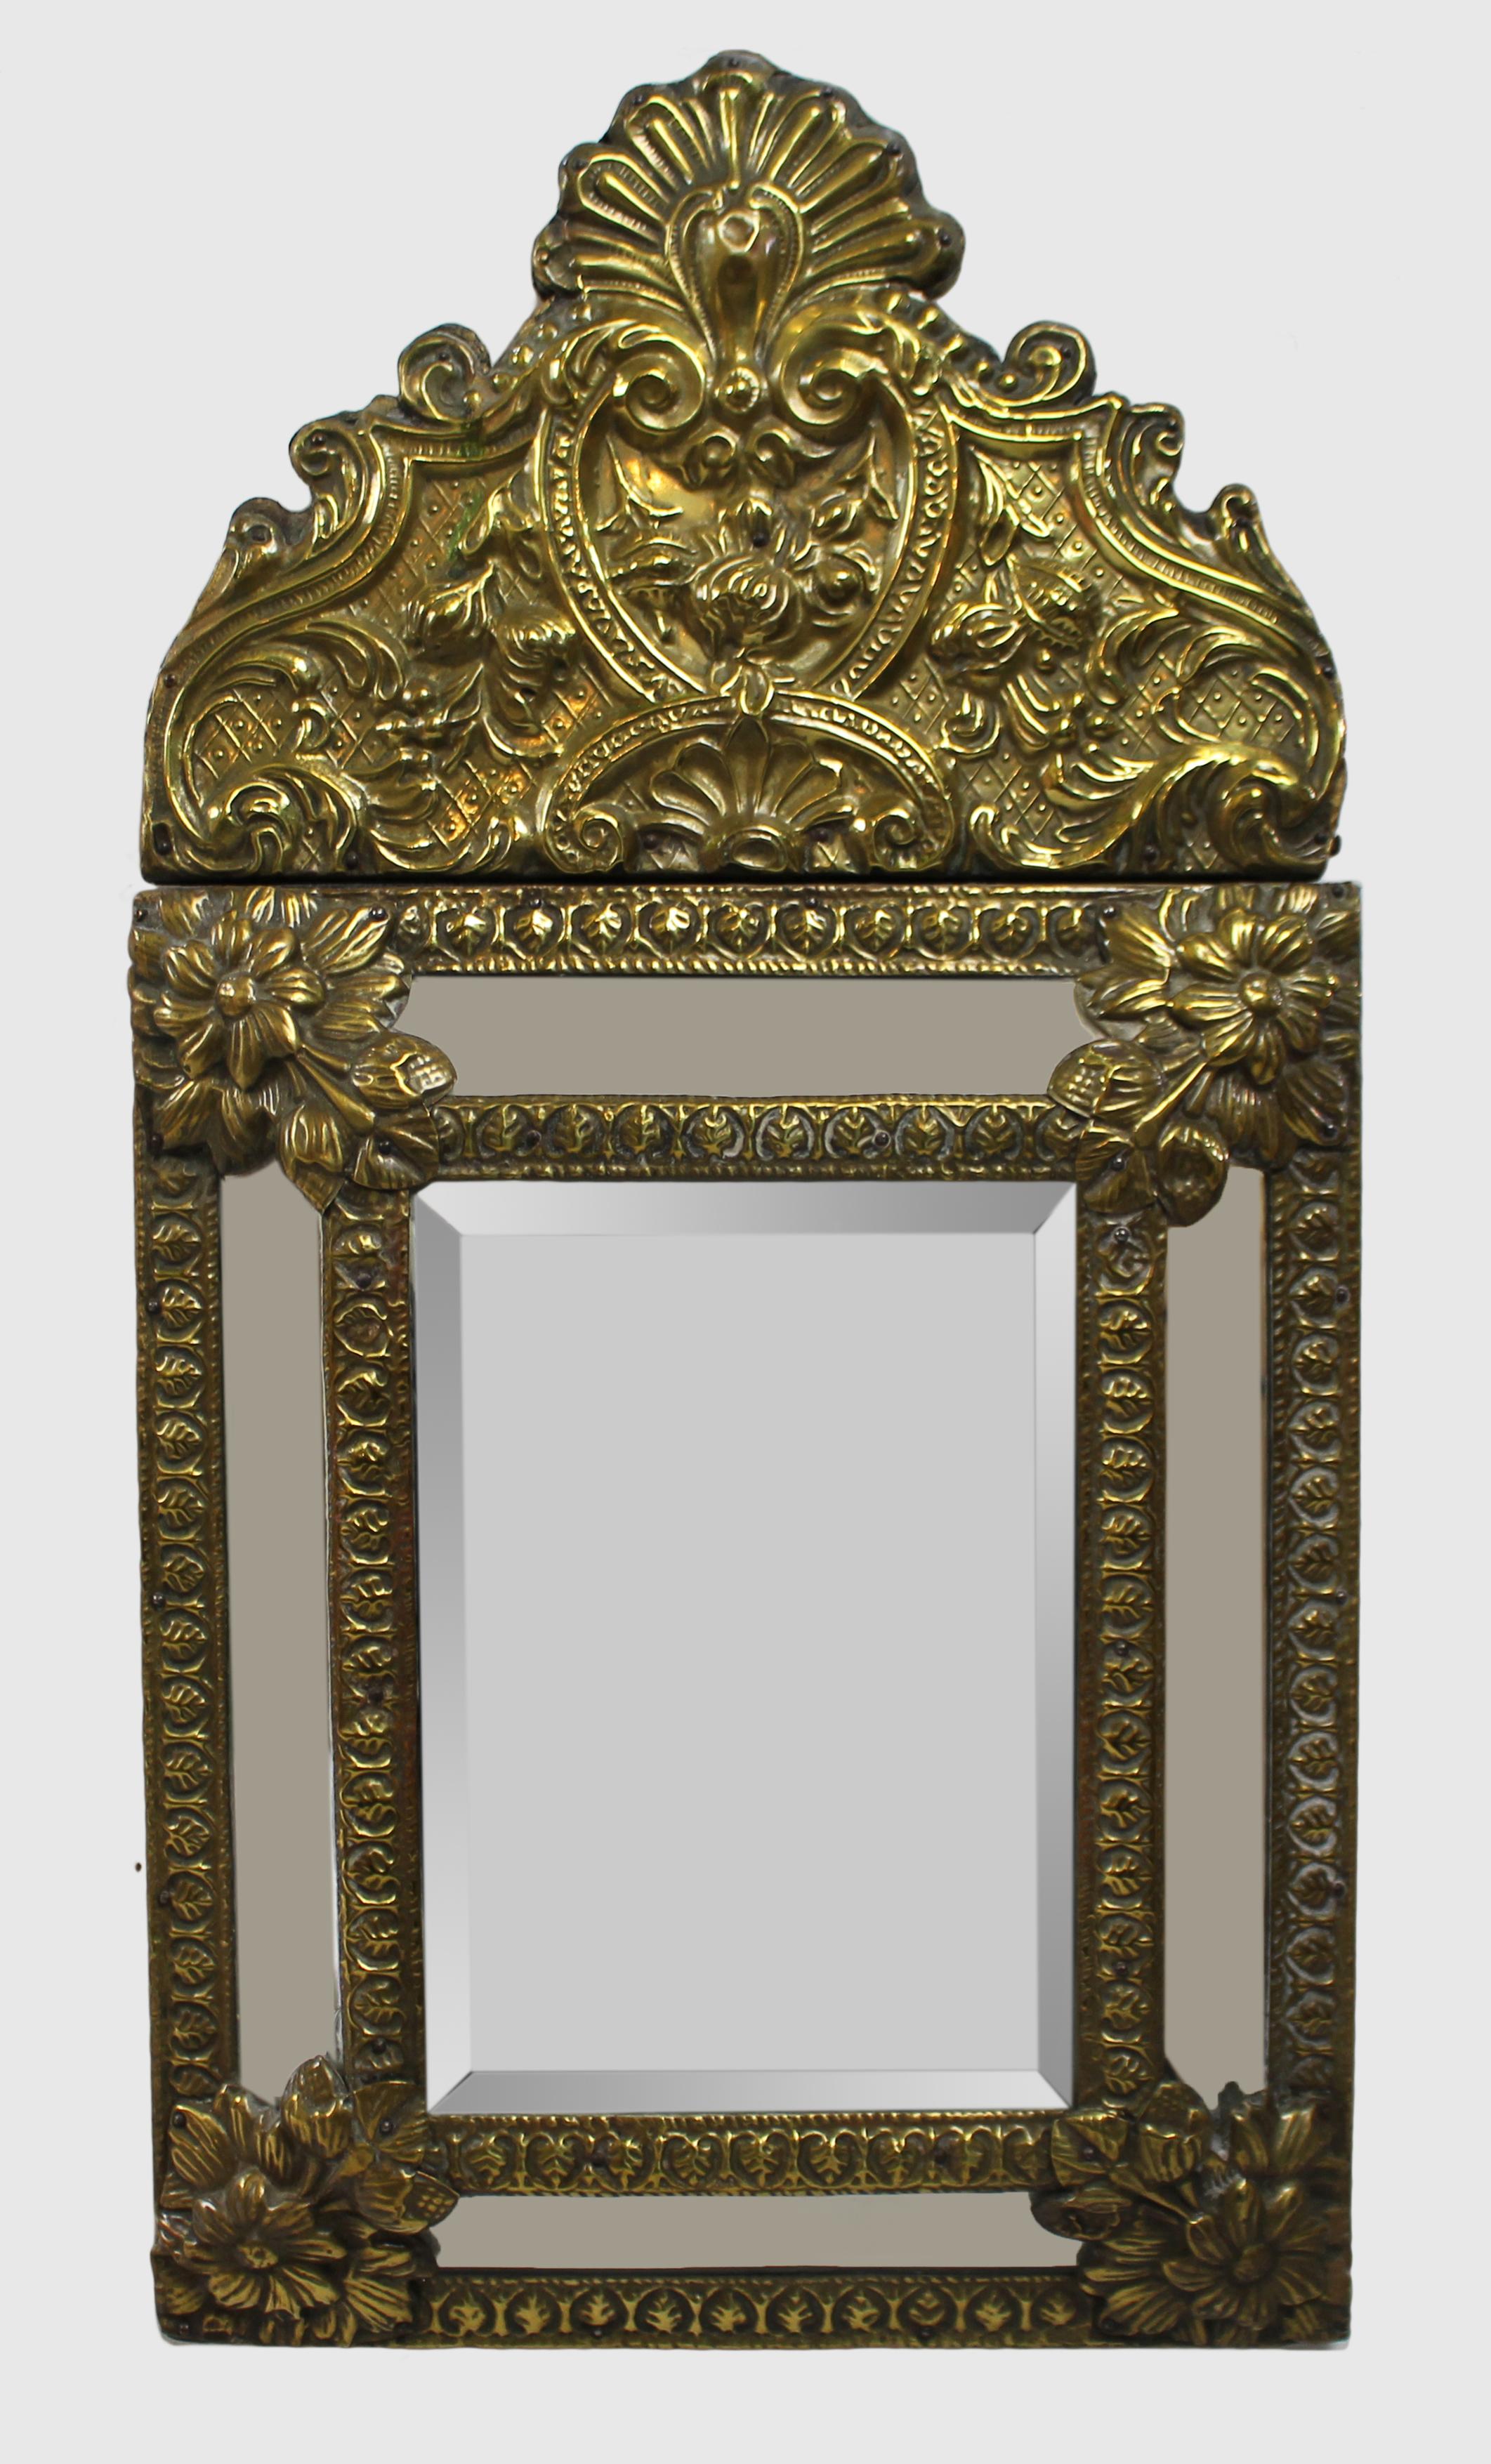 Small 19th c. French repoussé brass cushion mirror


Measures: Width 27 cm 10 1/2 in

Height 51.5 cm 20 1/4 in
 
Period 19th c., French

Frame Brass, ornate repoussé work

Mirror Original bevelled glass

Condition Offered in good